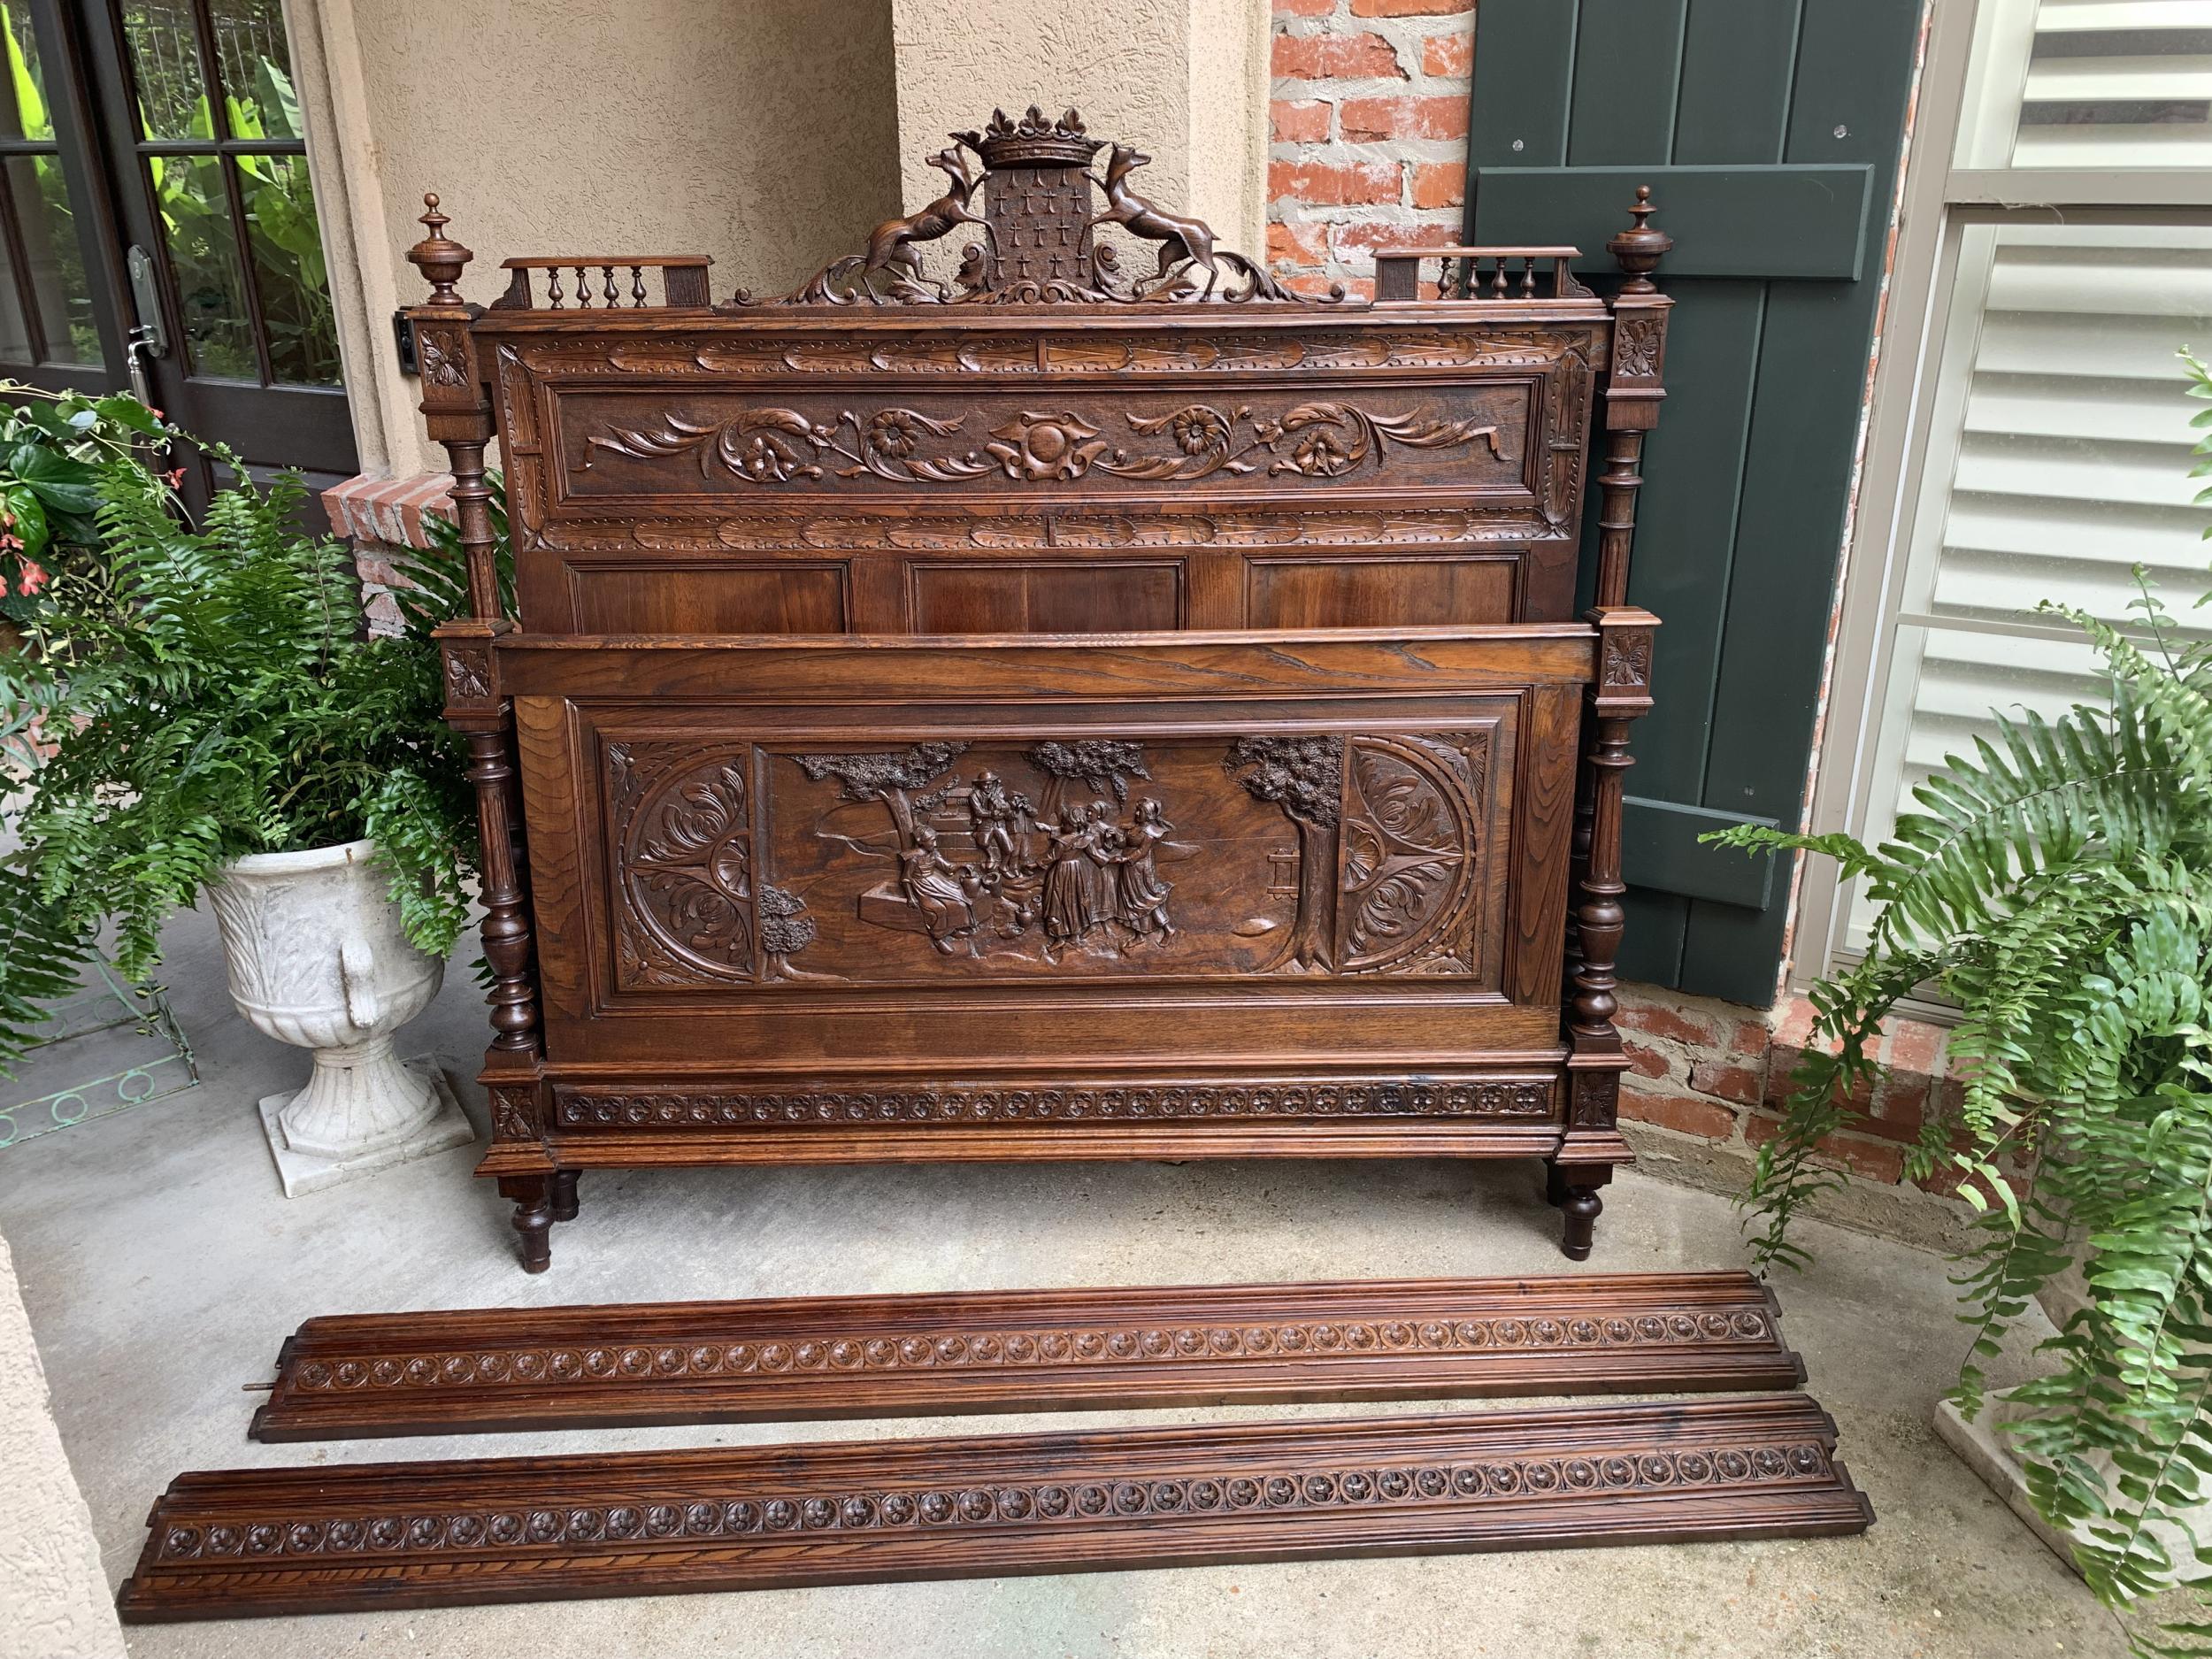 19th century antique French Breton carved oak bed duke of Brittany coat of arms

~Direct from France~
~Unique 19th century French bed, direct from the Brittany region, highly carved with details particular to the Breton style~
~Headboard